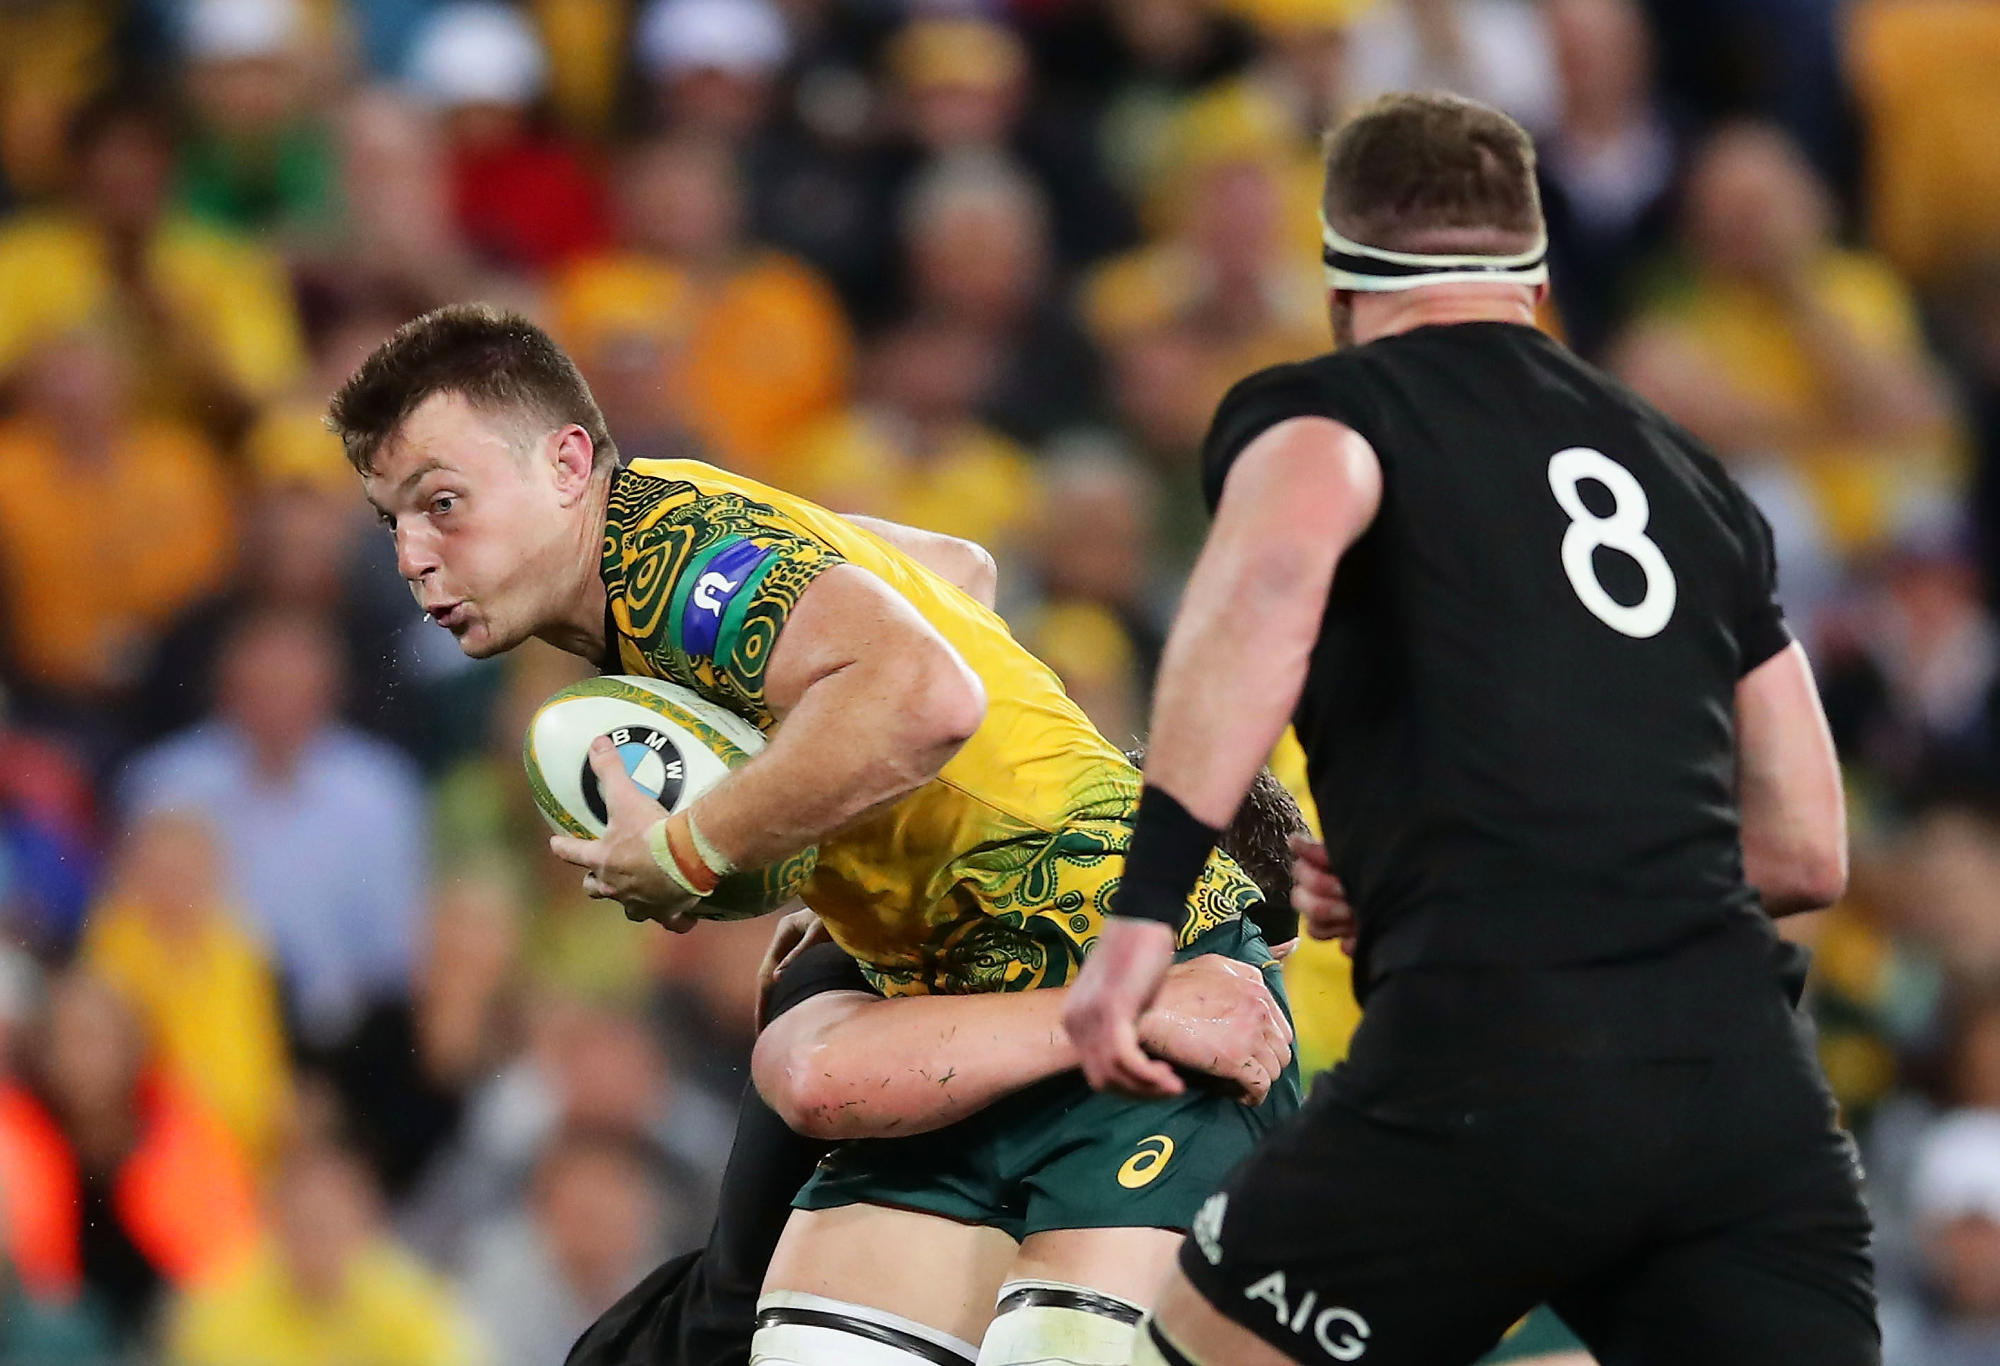 Jack Dempsey of the Wallabies is tackled during the Bledisloe Cup match between the Australian Wallabies and the New Zealand All Blacks at Suncorp Stadium on October 21, 2017 in Brisbane, Australia.